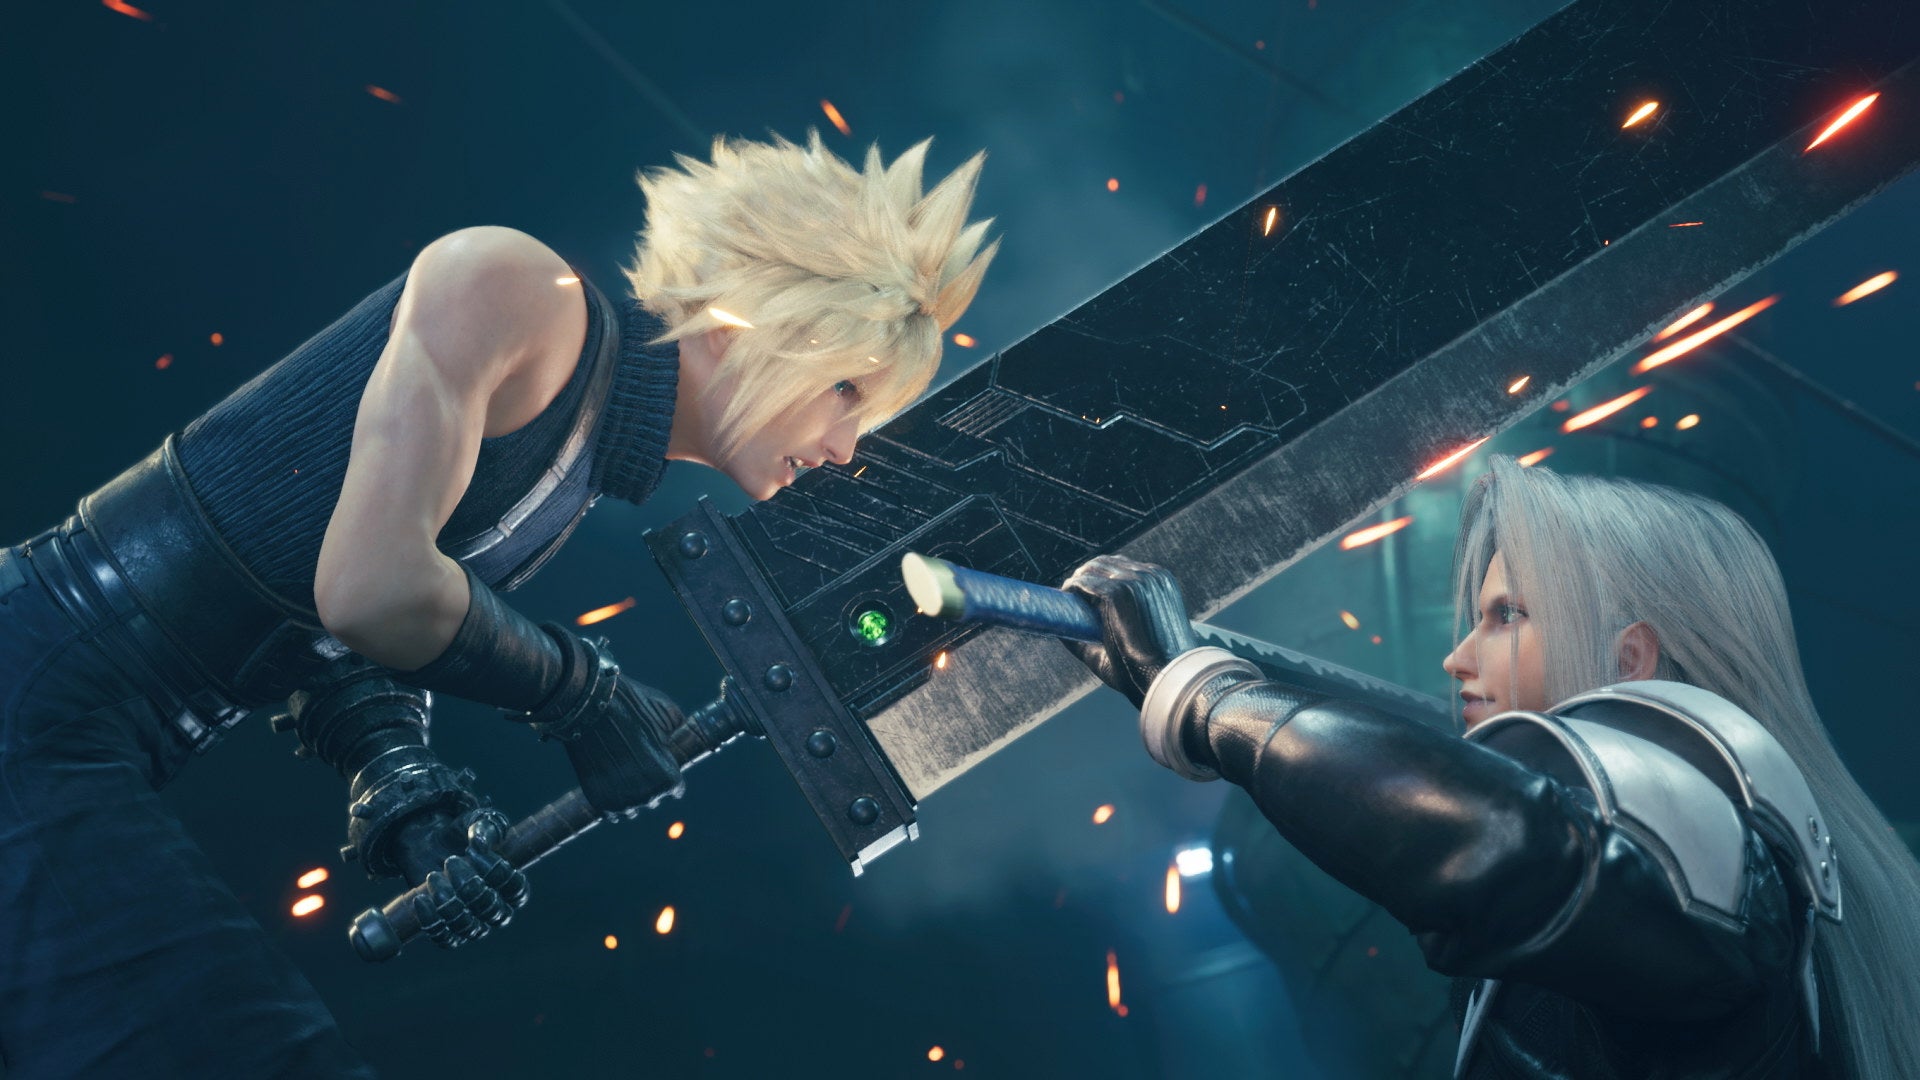 There’s a Final Fantasy VII 25th anniversary livestream on June 16th